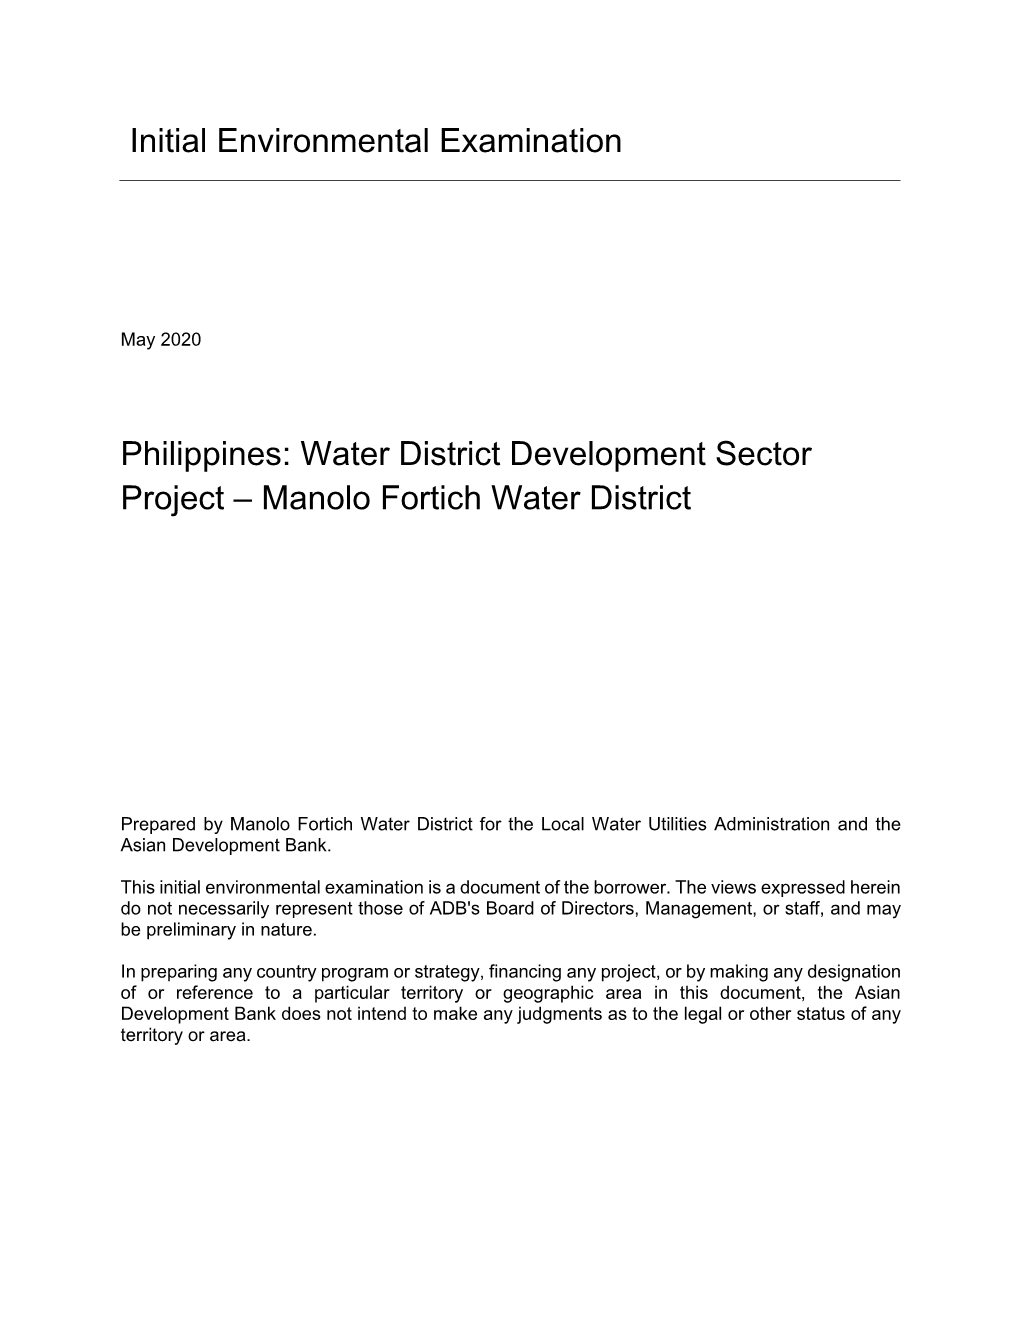 Manolo Fortich Water District